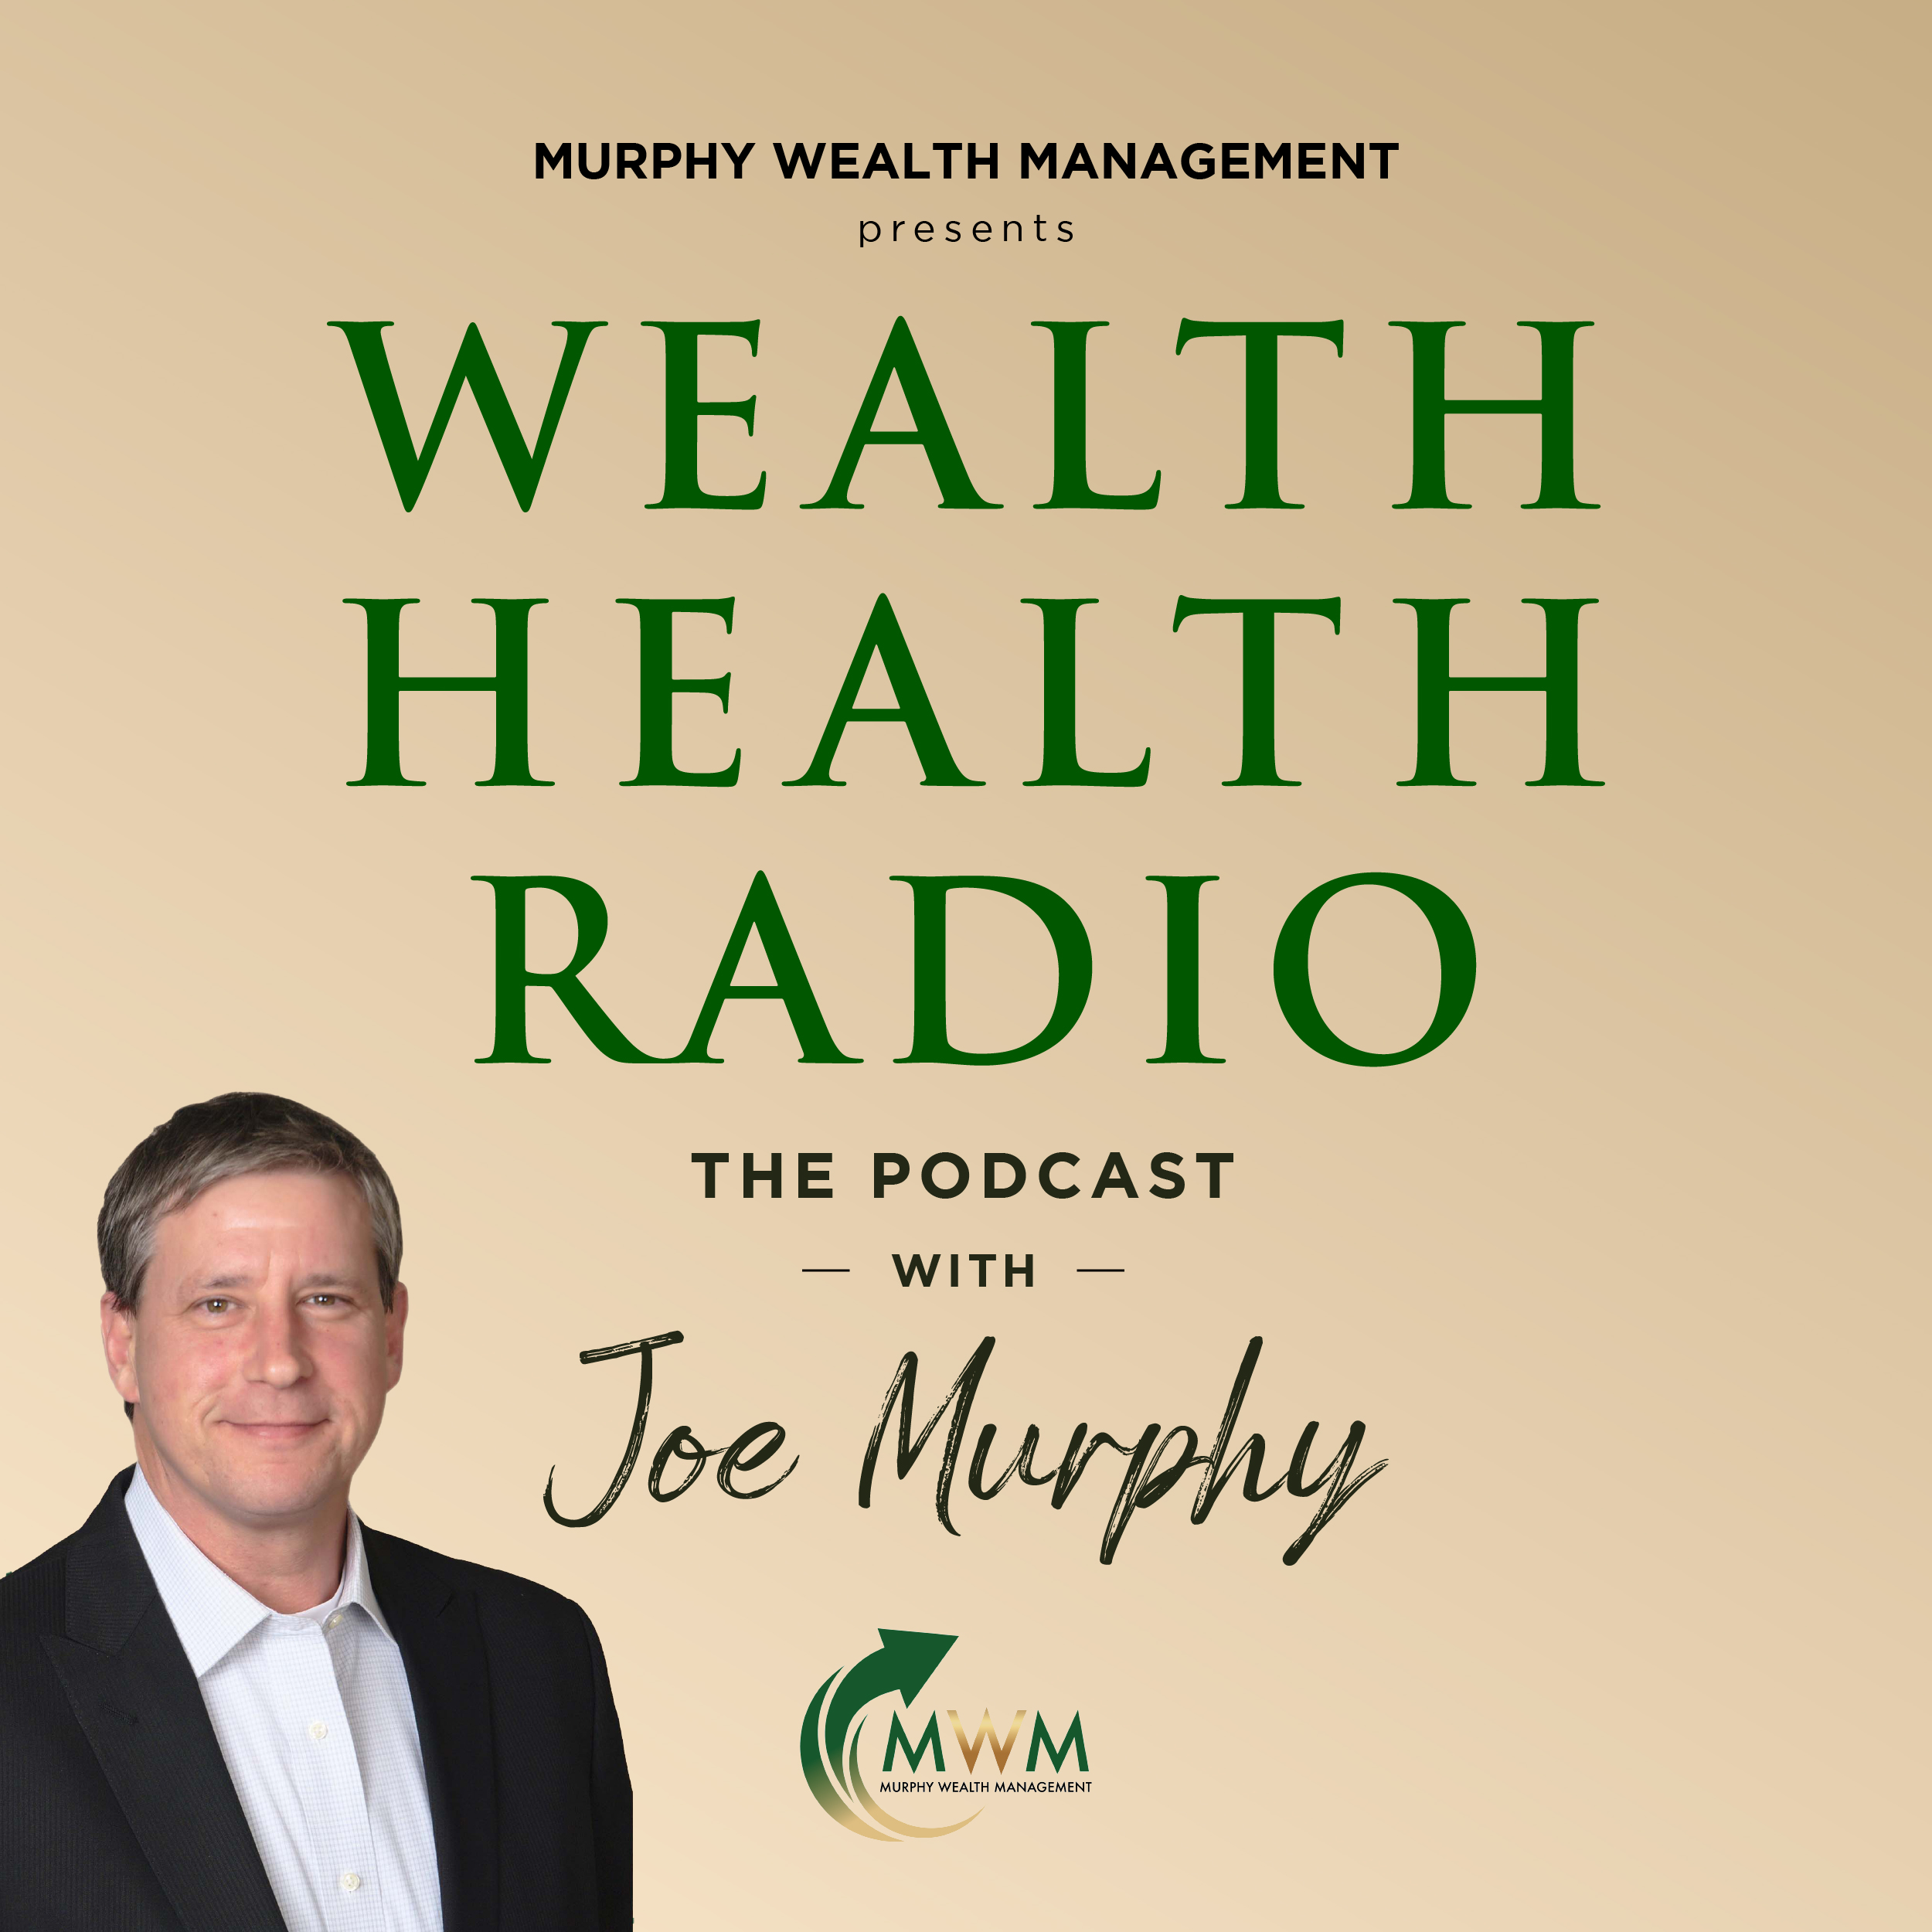 Wealth Health Radio Joe Murphy answers some of the most common questions pre-retirees ask advisors on today’s episode of Wealth Health Radio.